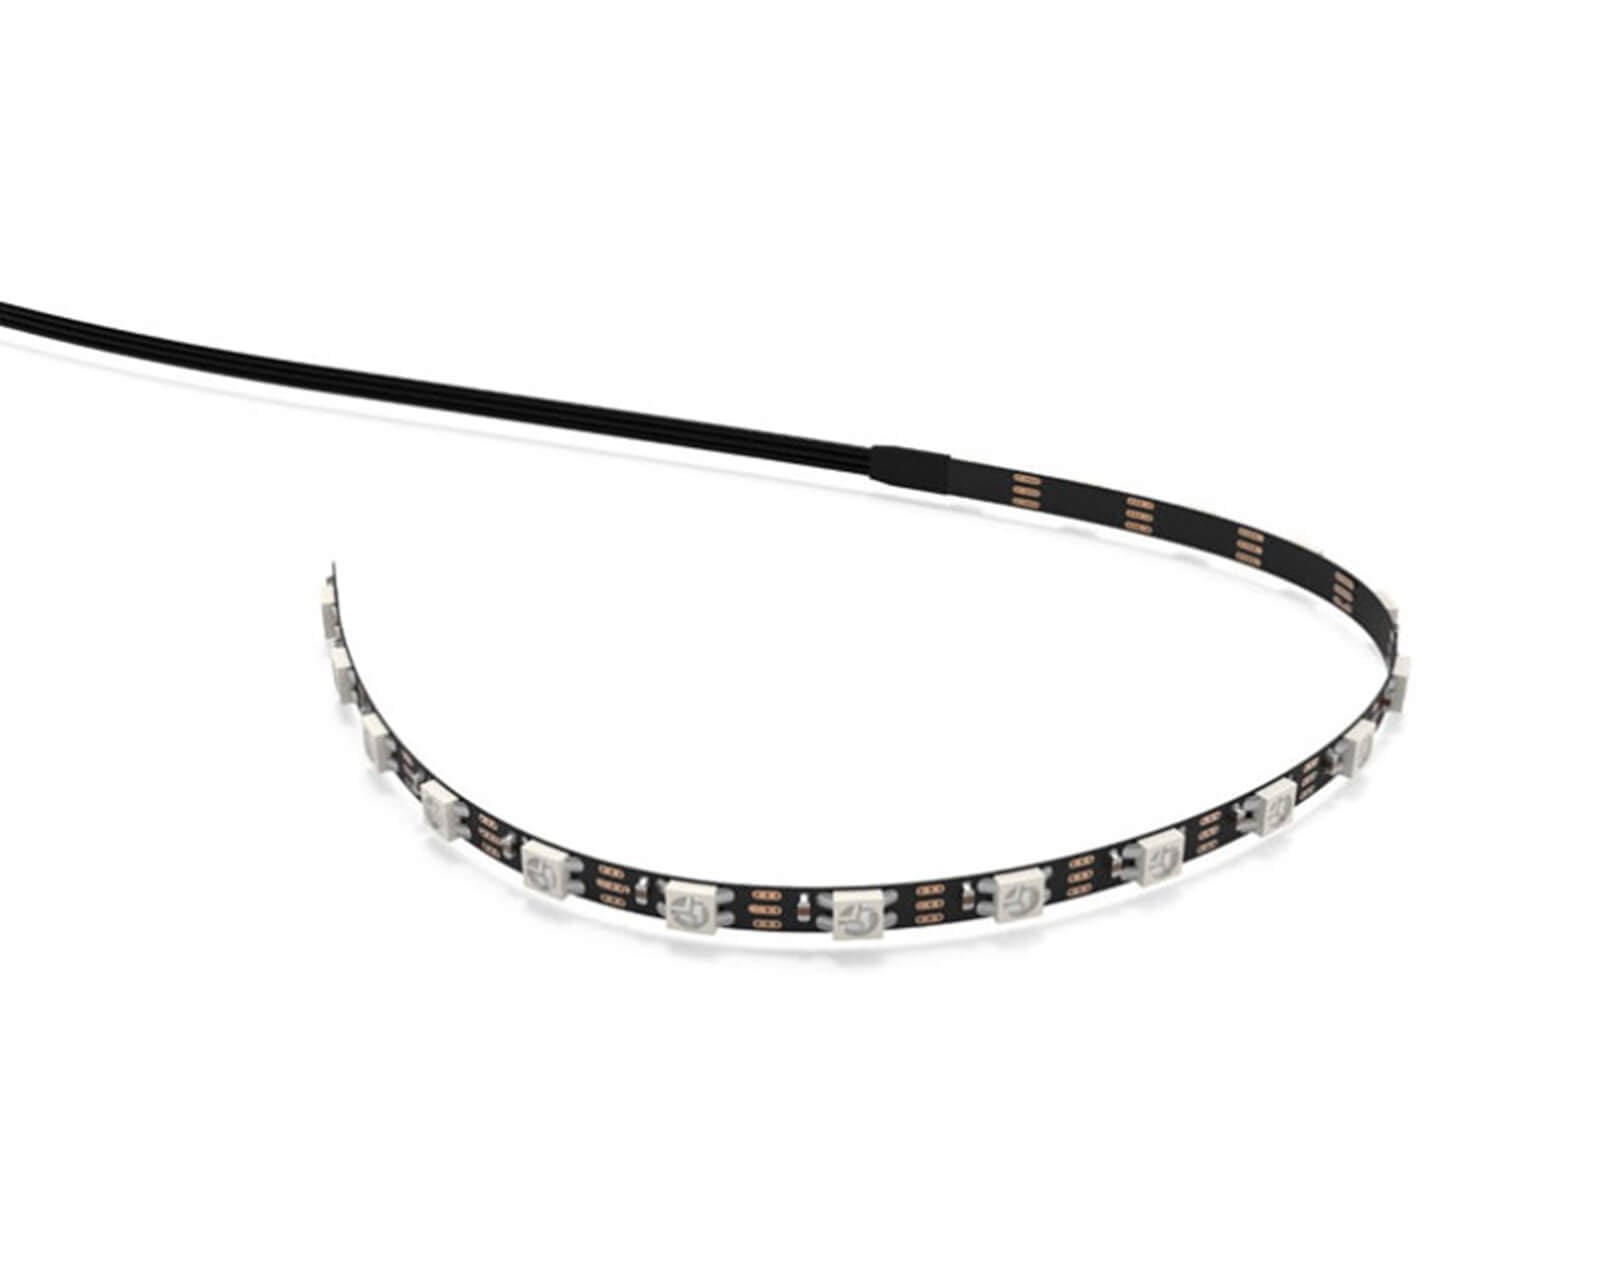 Bykski Replacement Flexible 5v Addressable RGB (RBW) LED Strip - PrimoChill - KEEPING IT COOL 230mm